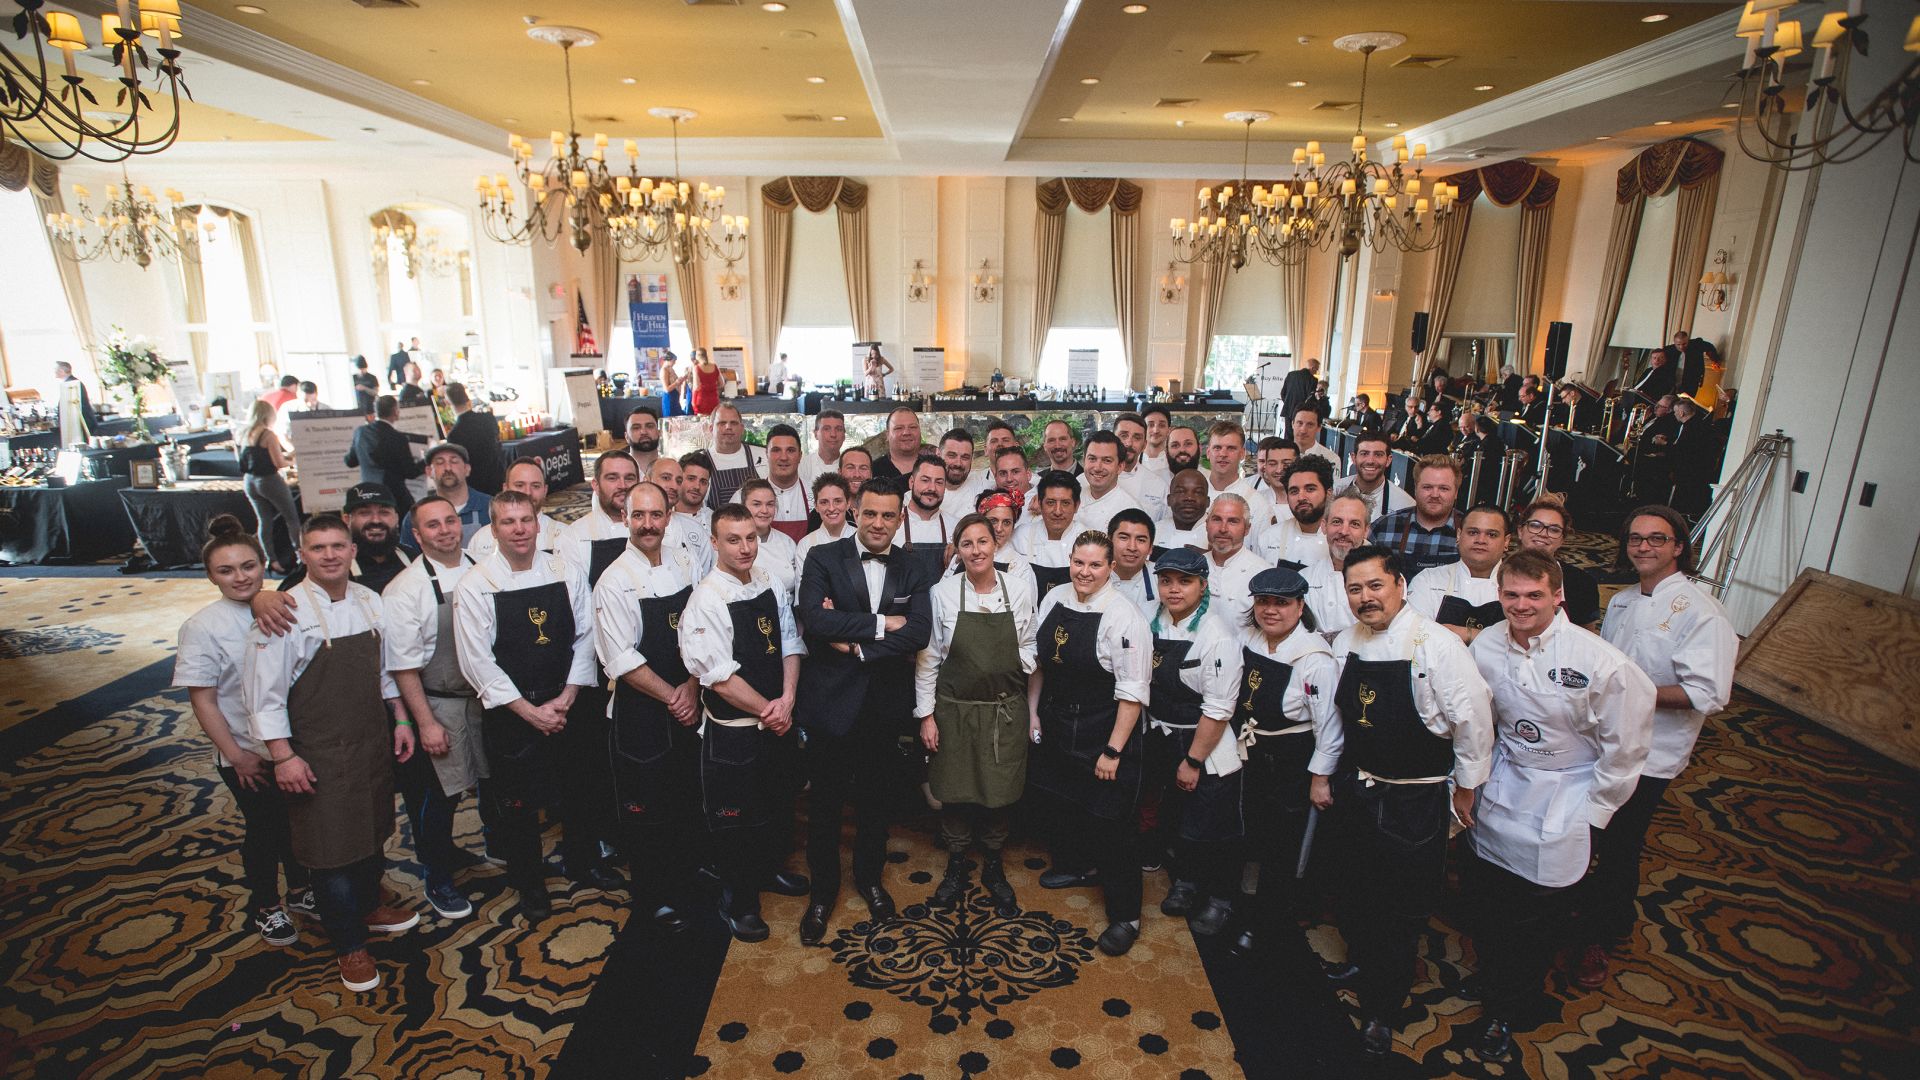 Robby Younes & Chefs at Wine Event